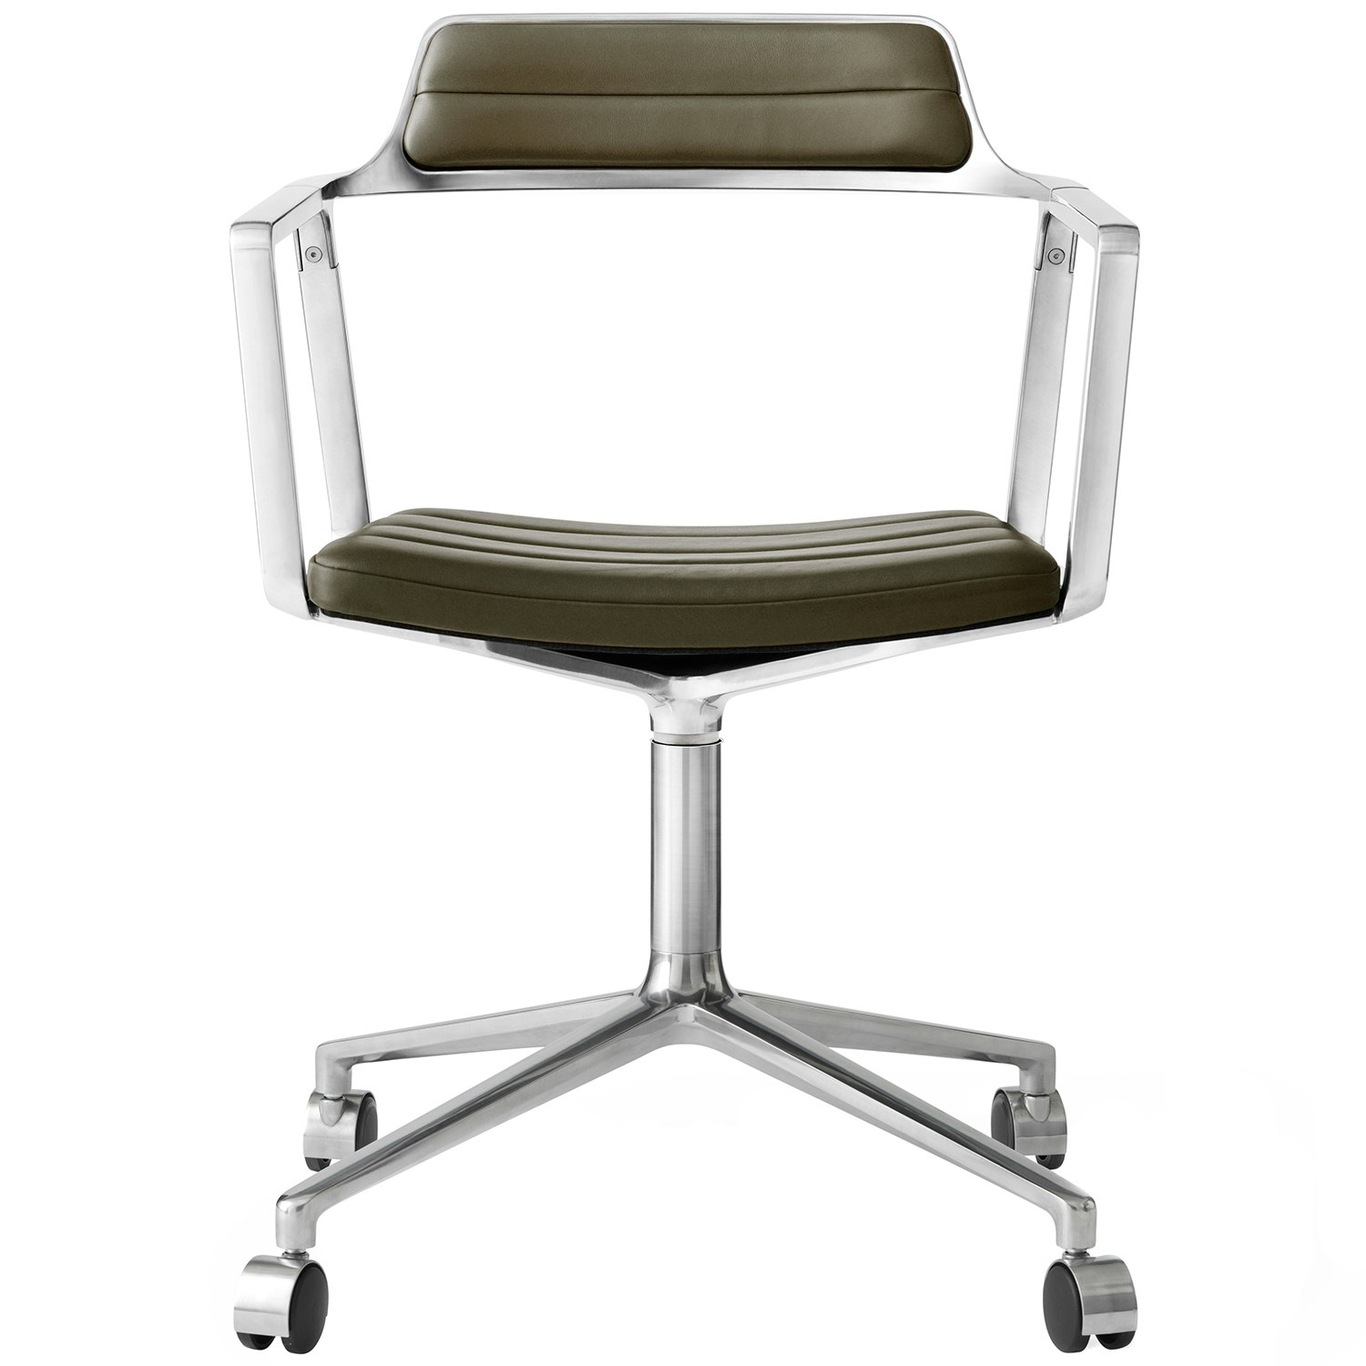 452 Swivel Chair With Wheels, Polished Aluminium / Green Leather